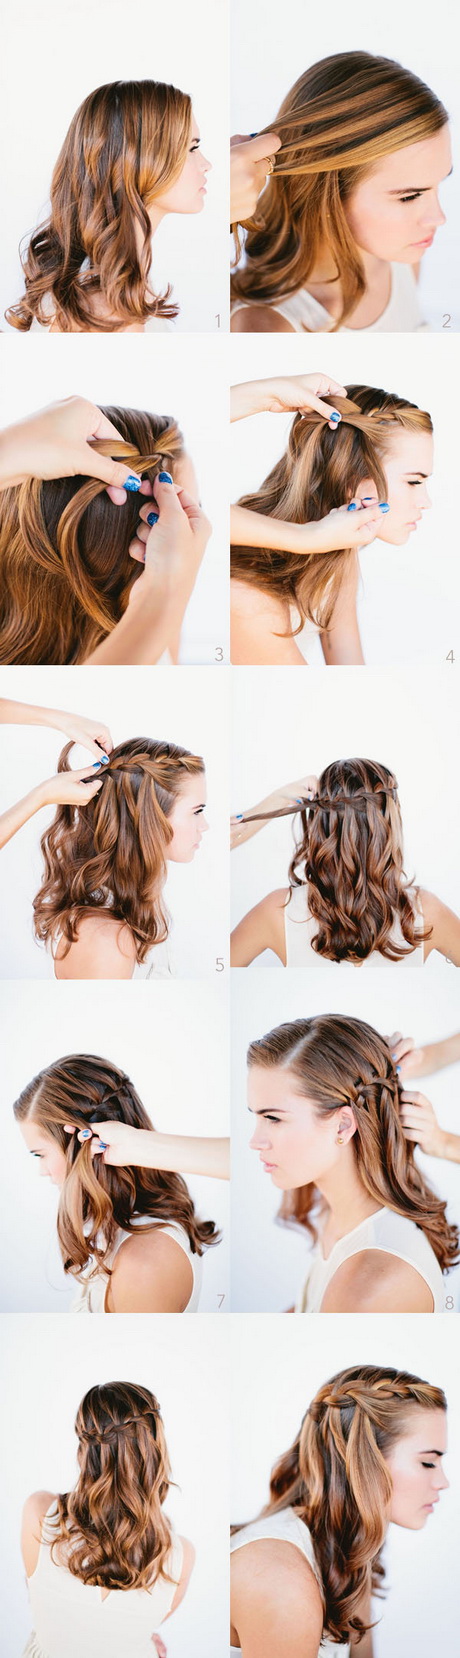 hairstyles-for-long-hair-step-by-step-03_18 Hairstyles for long hair step by step